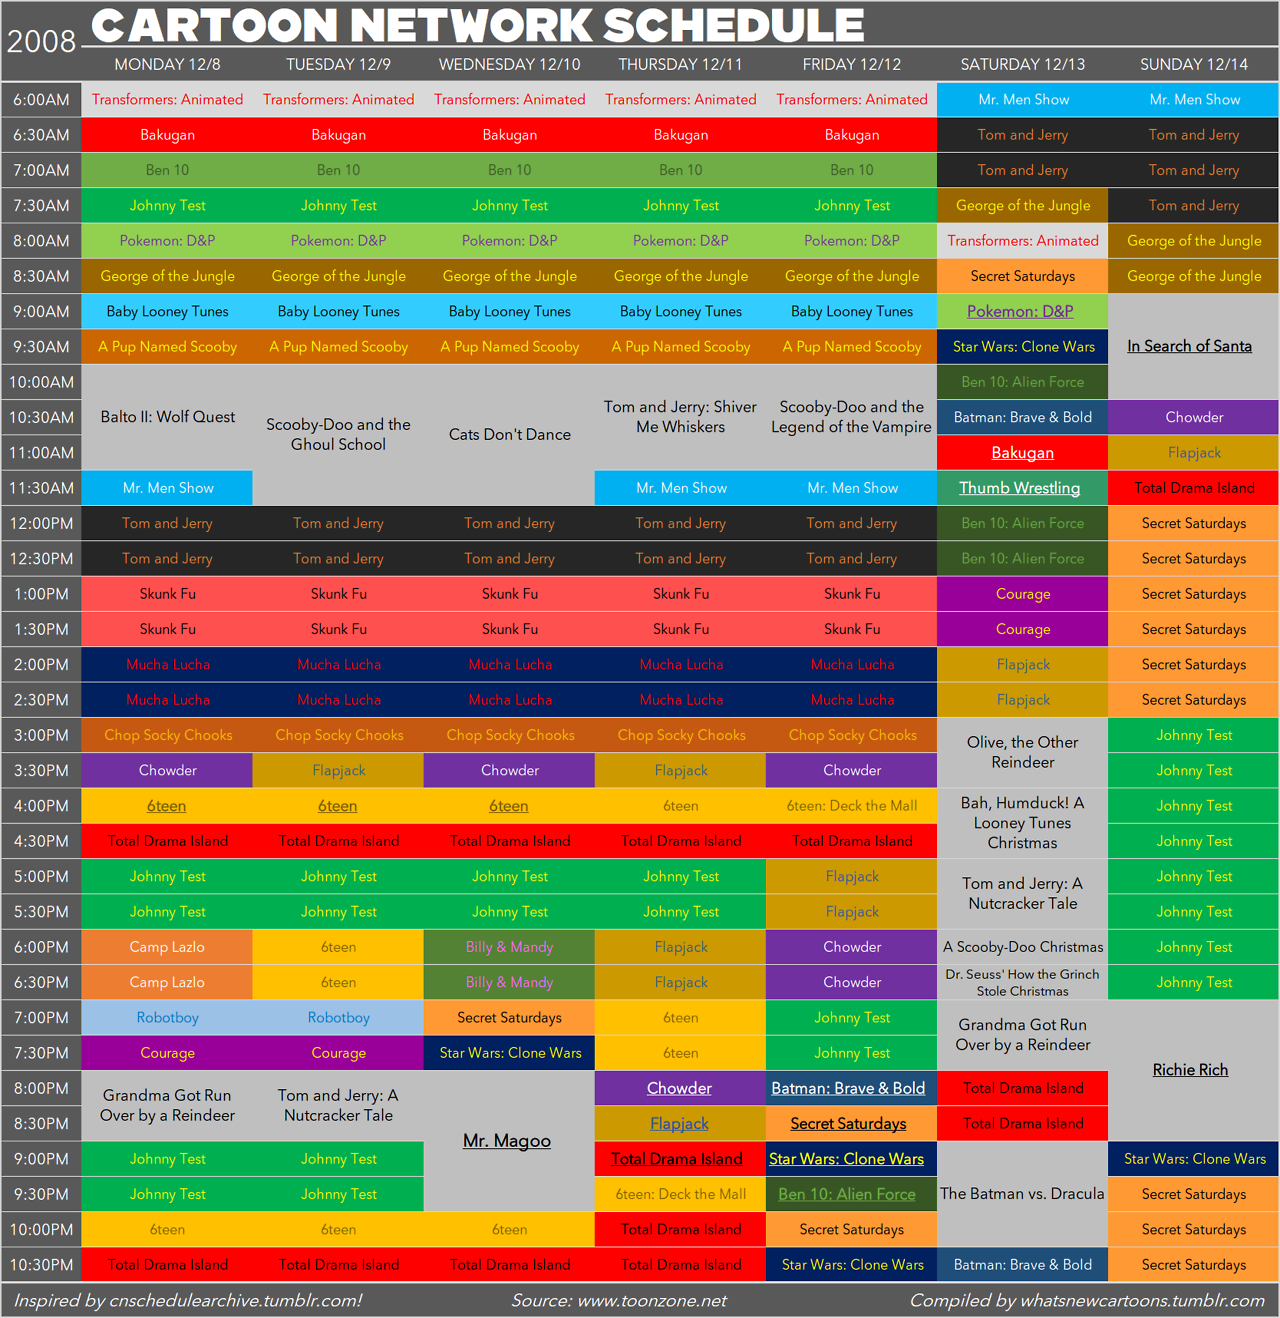 Boogstersu2 This Was The Cartoon Network Schedule For vrogue.co